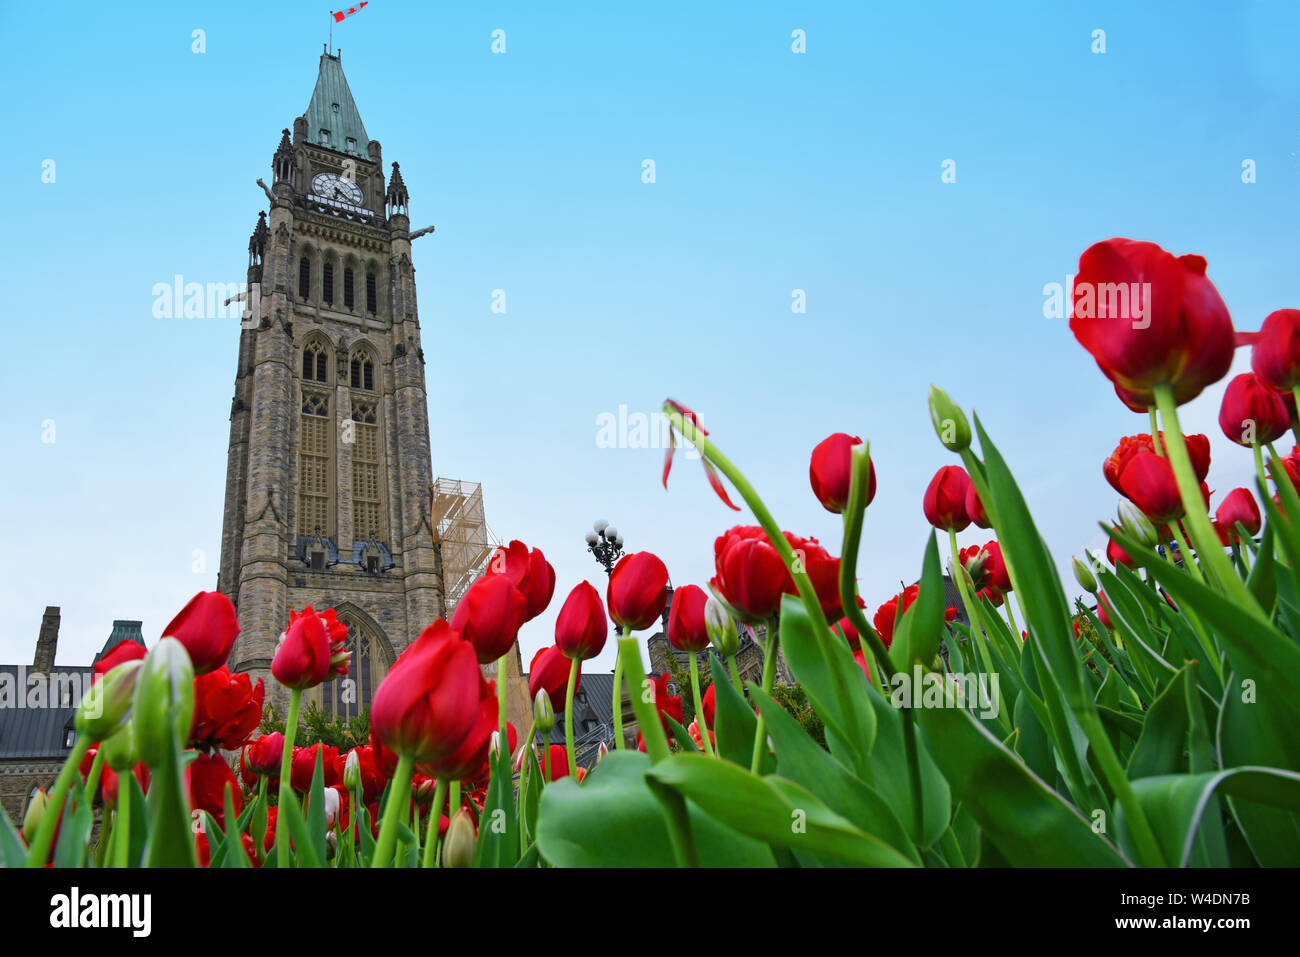 Tulips in Parliament Hill Stock Photo